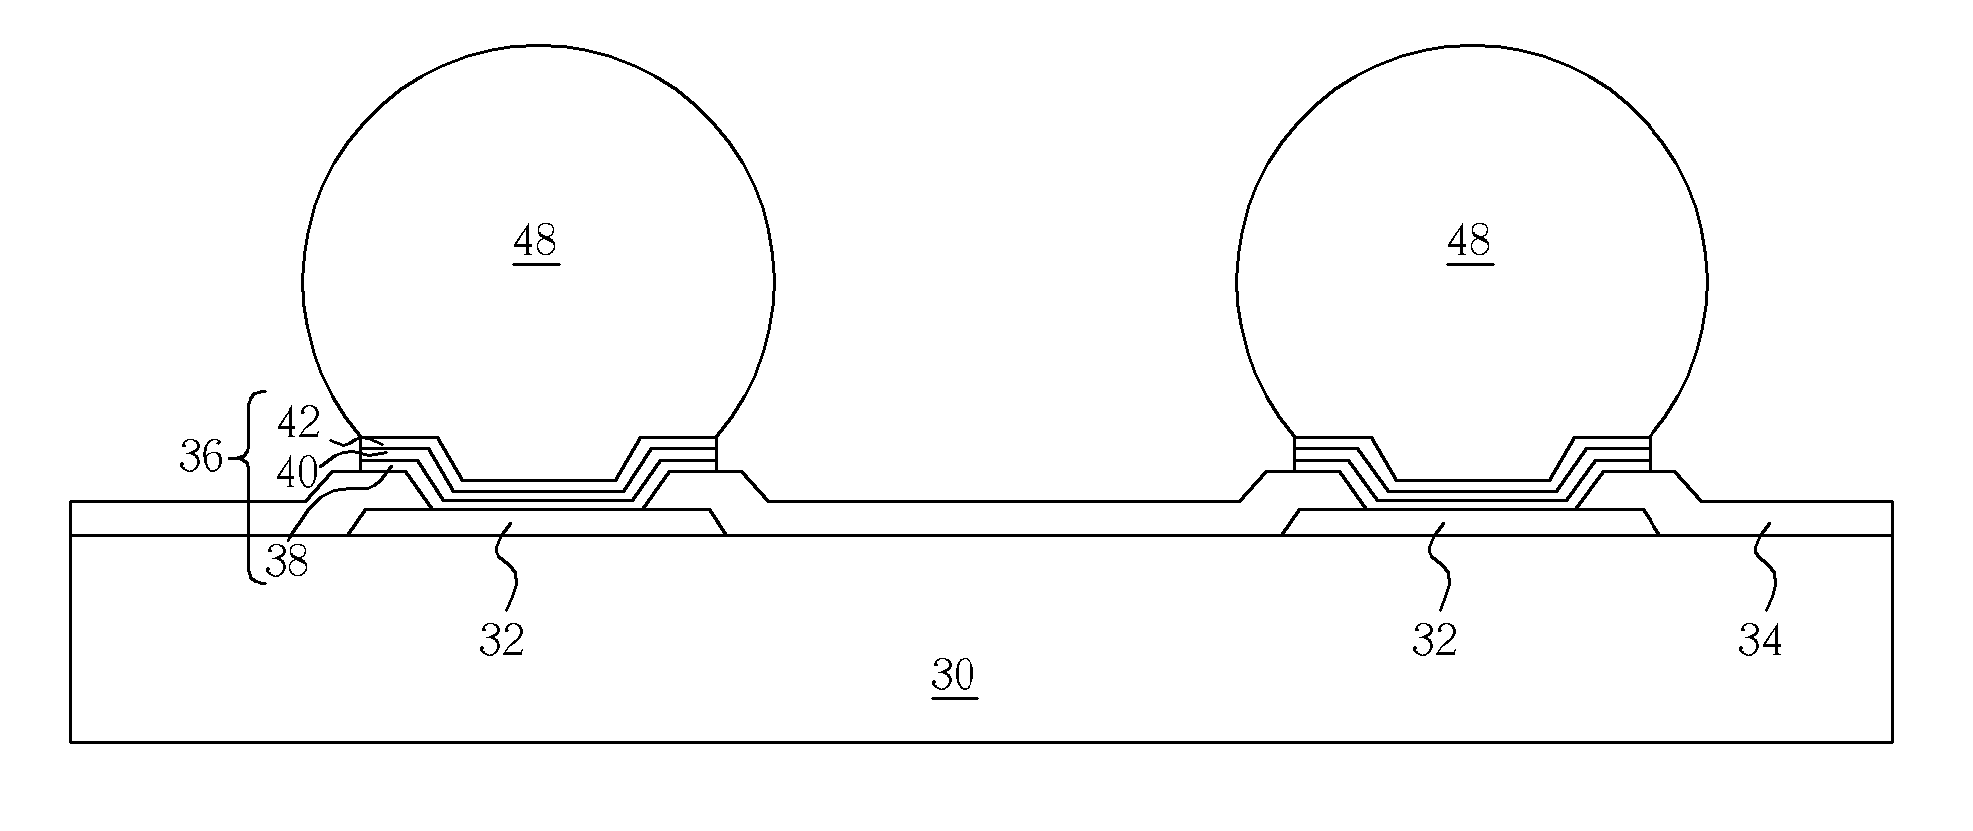 Etchant and method for forming bumps